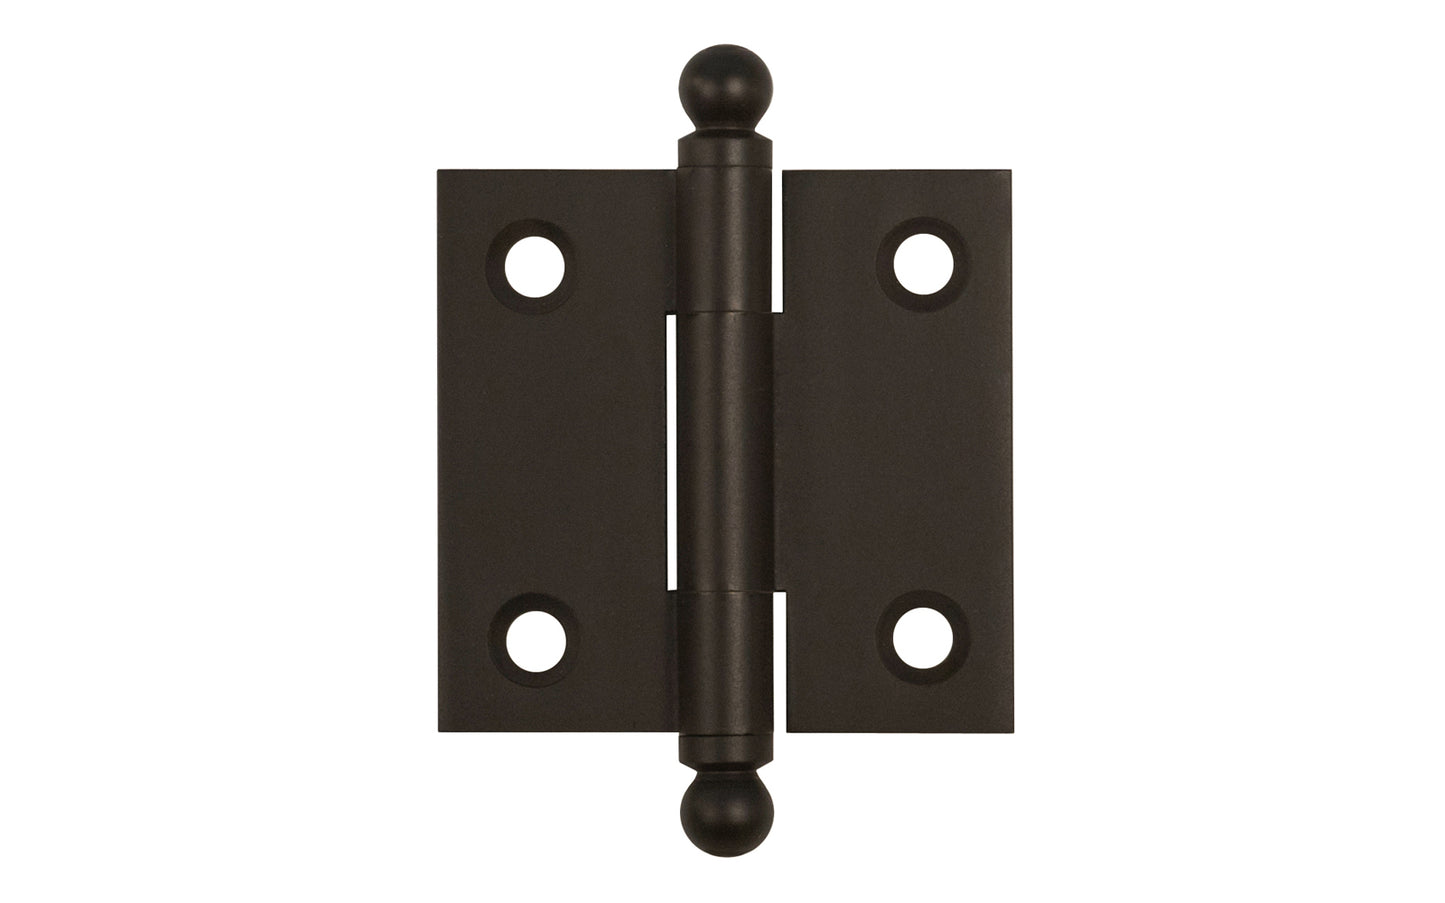 Classic Solid Brass Ball-Tip Cabinet Hinge ~ 1-1/2" x 1-1/2". Full mortise extruded hinges. 3/32" heavy duty leaf thickness gauge. Non-removable fixed hinge pin with ball tips. High quality thick cabinet hinge with ball tips. Oil rubbed bronze finish.